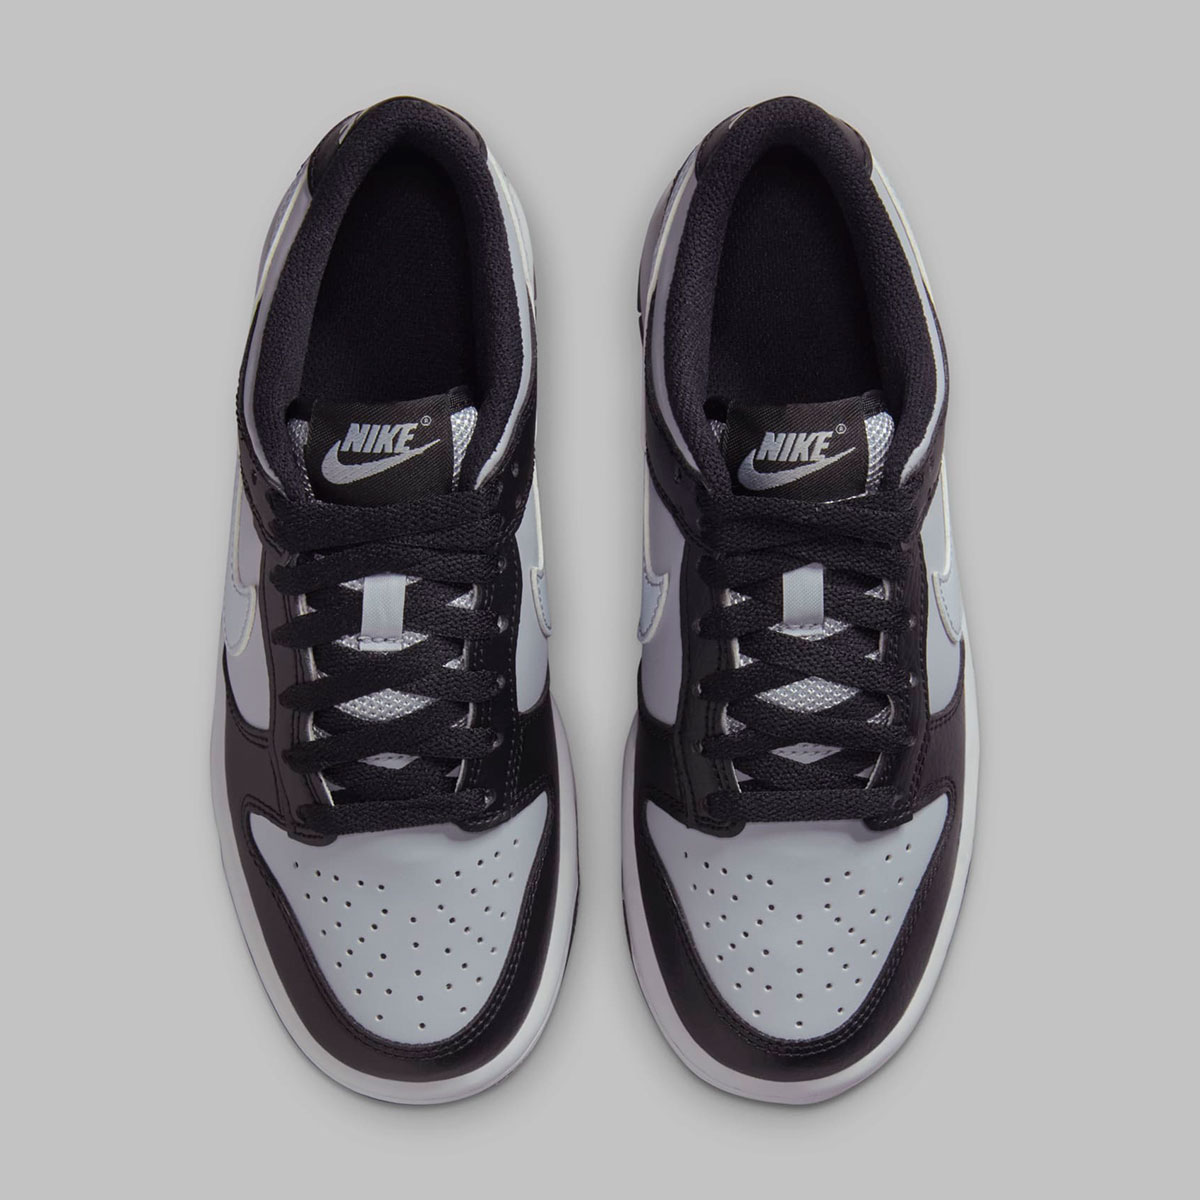 Nike Dunk Low Gs Black Reflective Pack Release Date 4